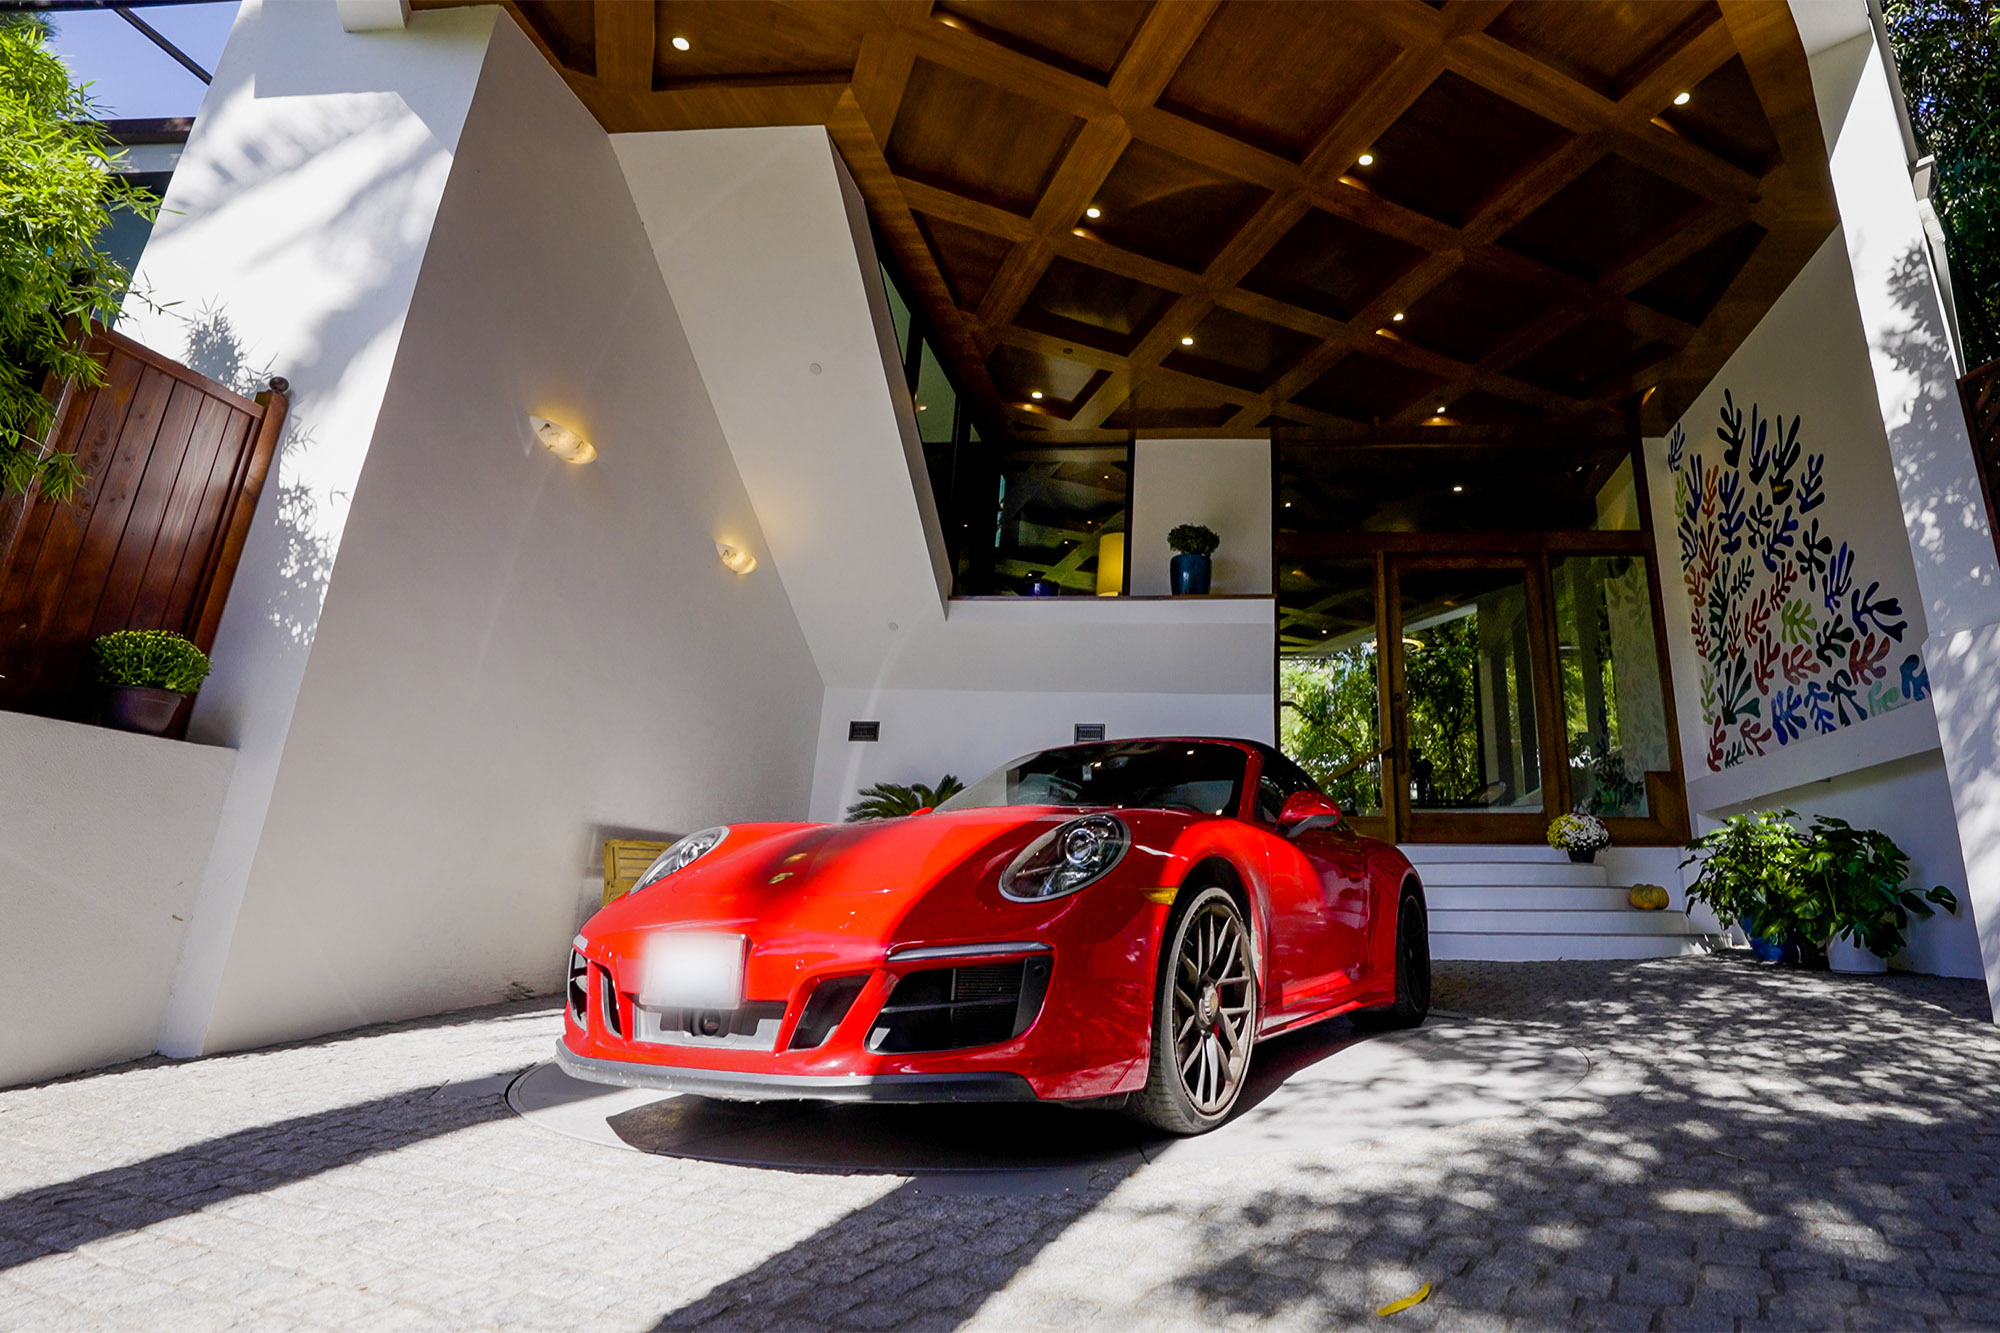 A red sports car turns on a turntable in a driveway.